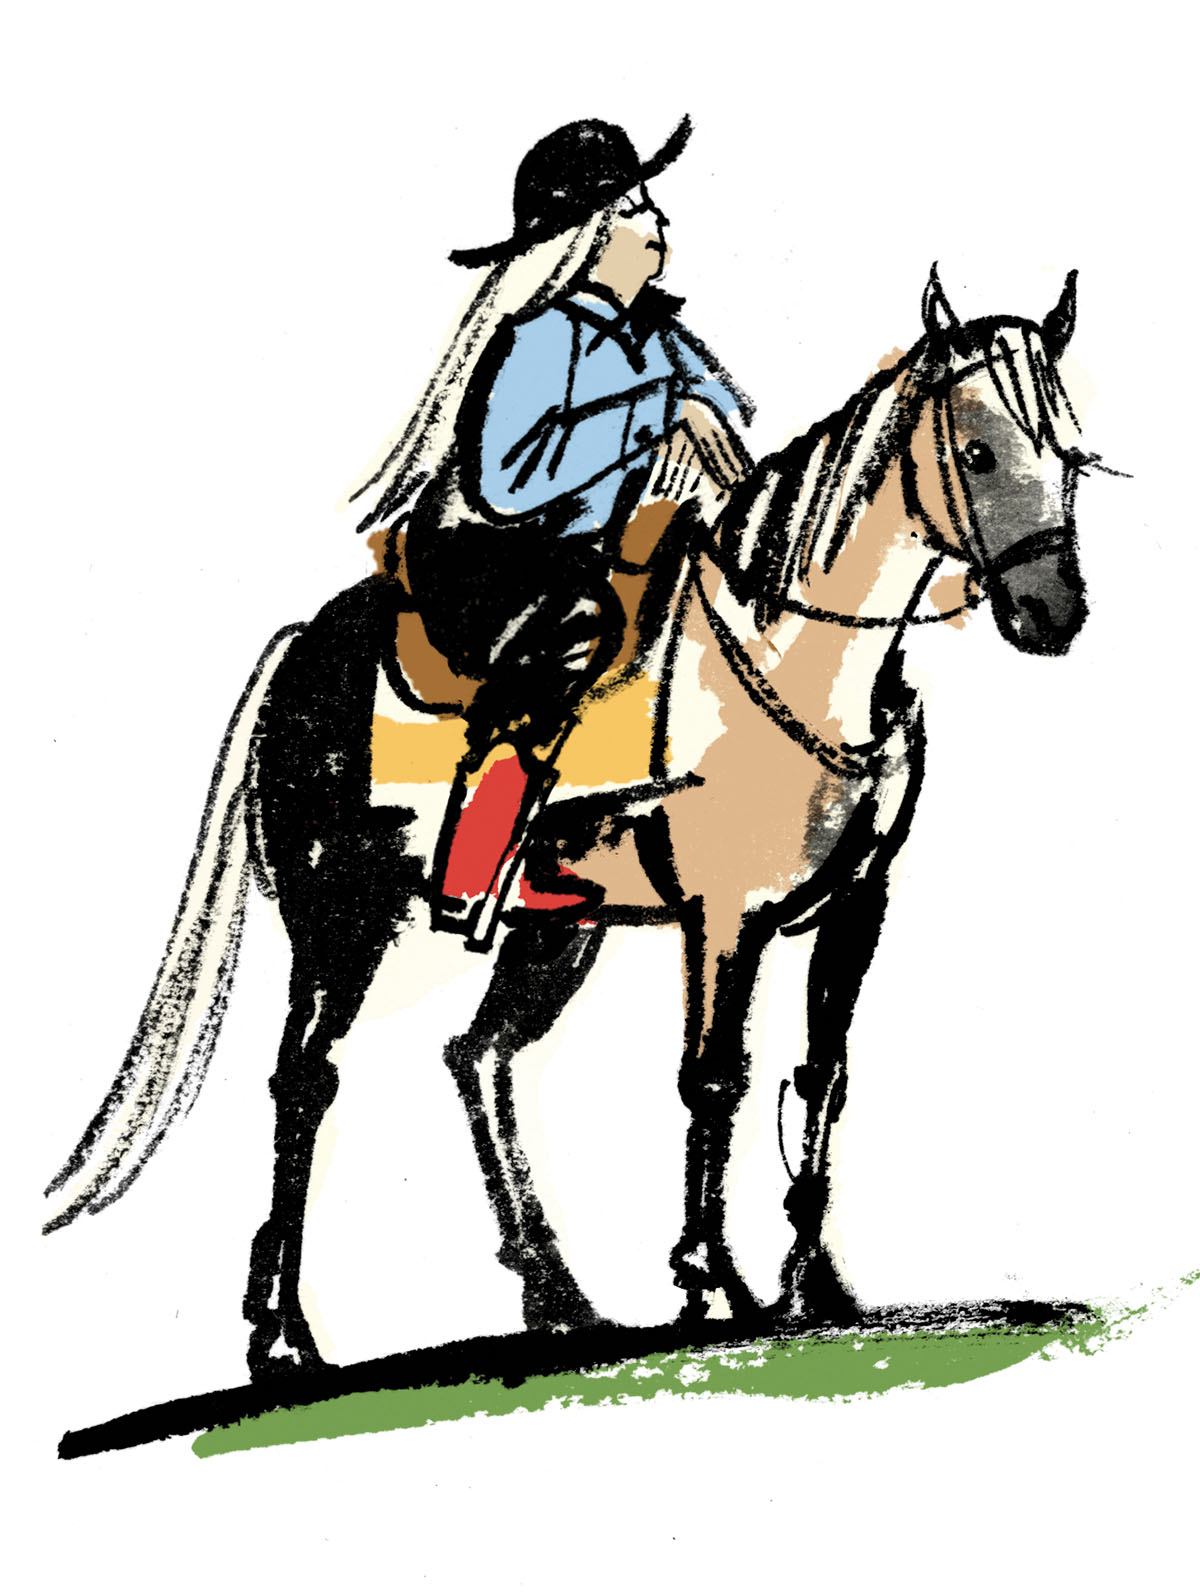 An illustration of a woman in a black cowboy hat riding a horse